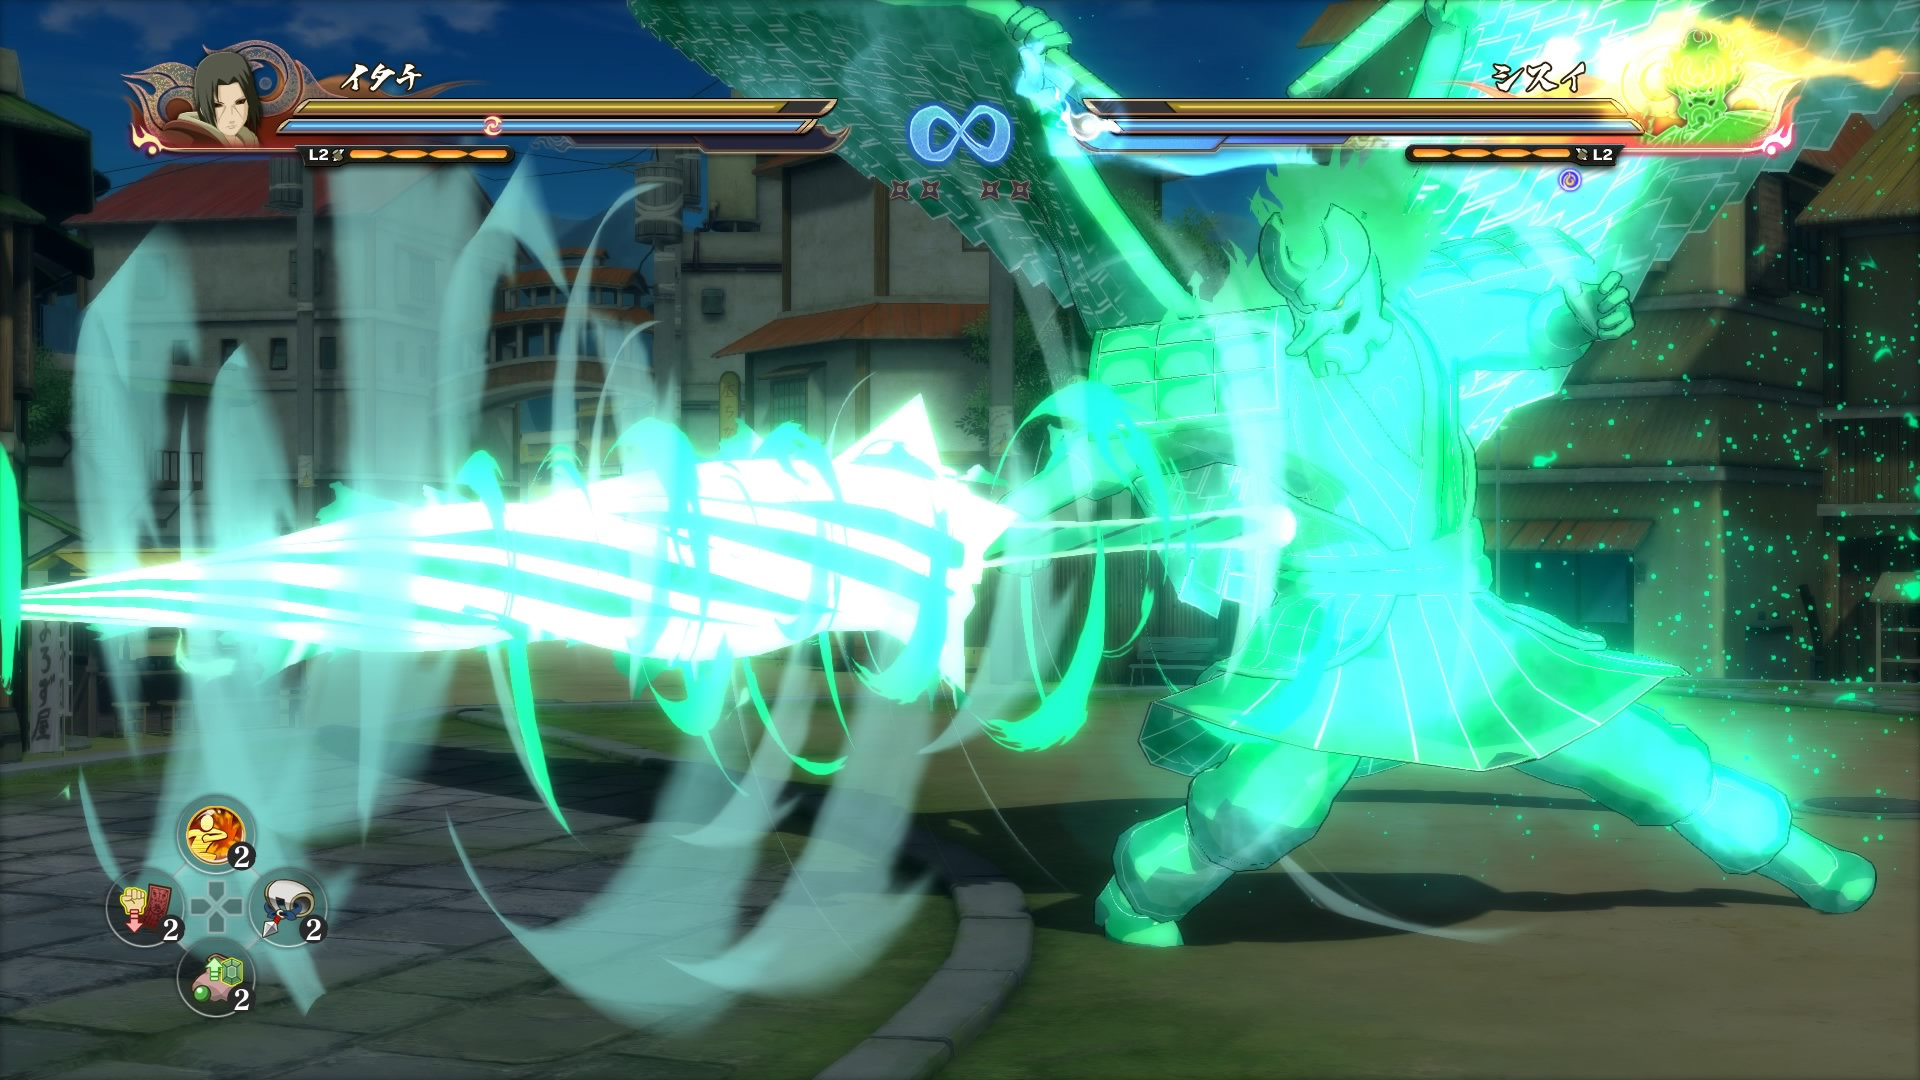 Download game ppsspp gold naruto ninja storm 3